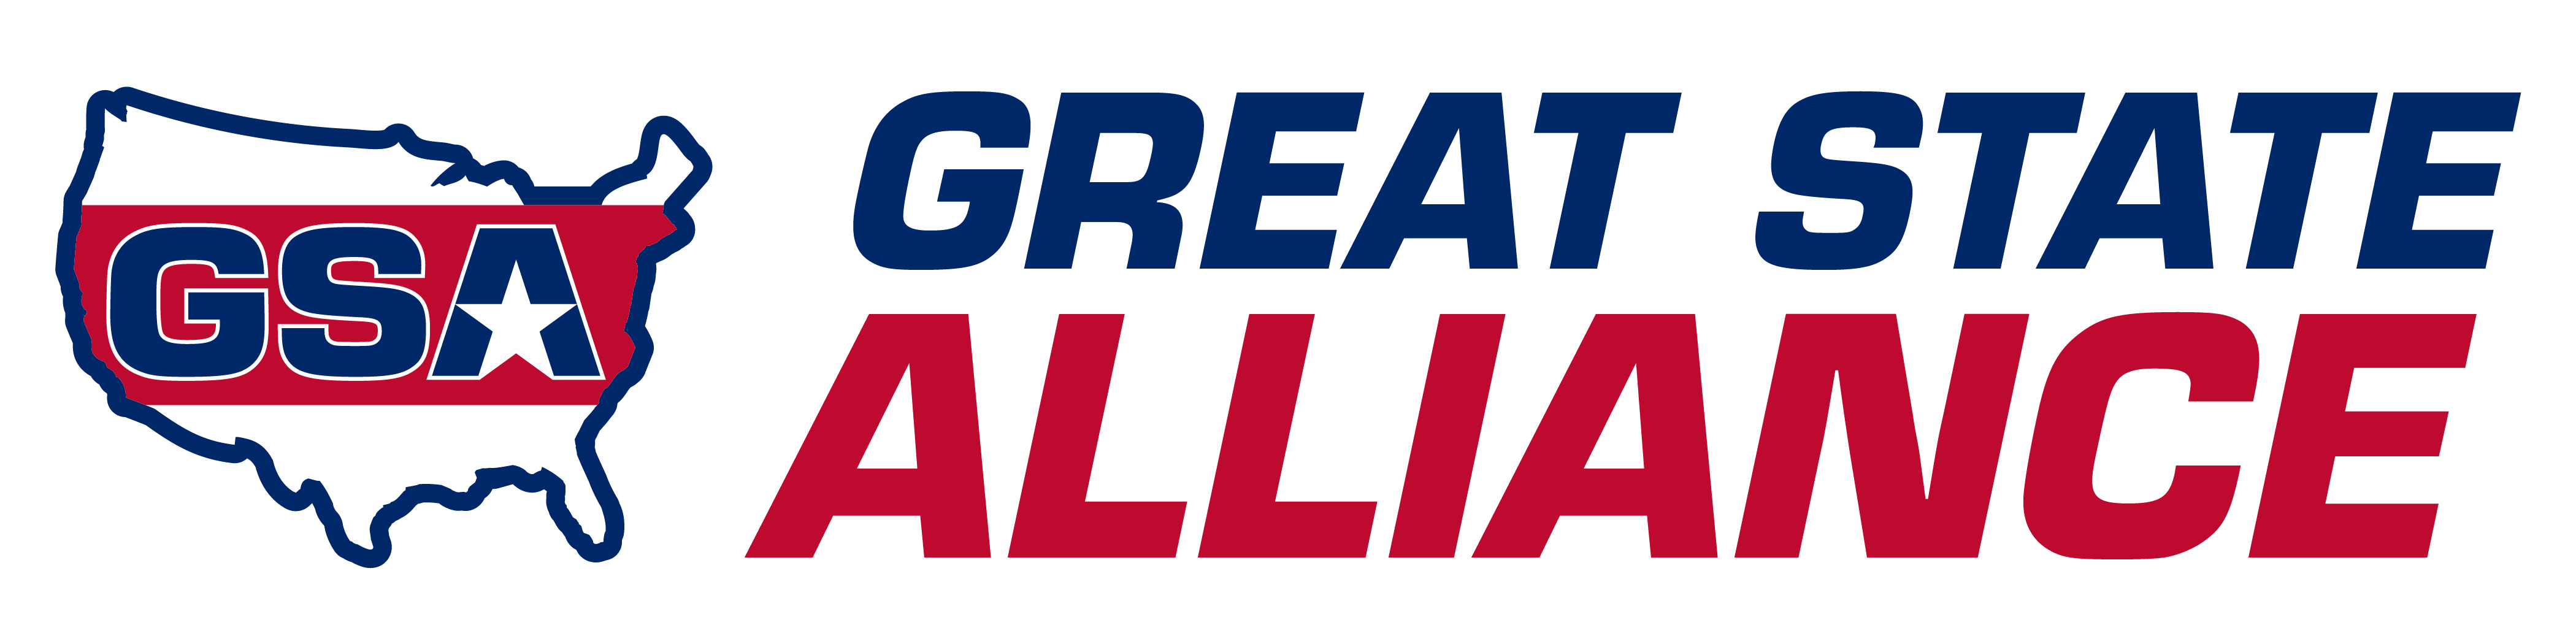 Great State Alliance Logo